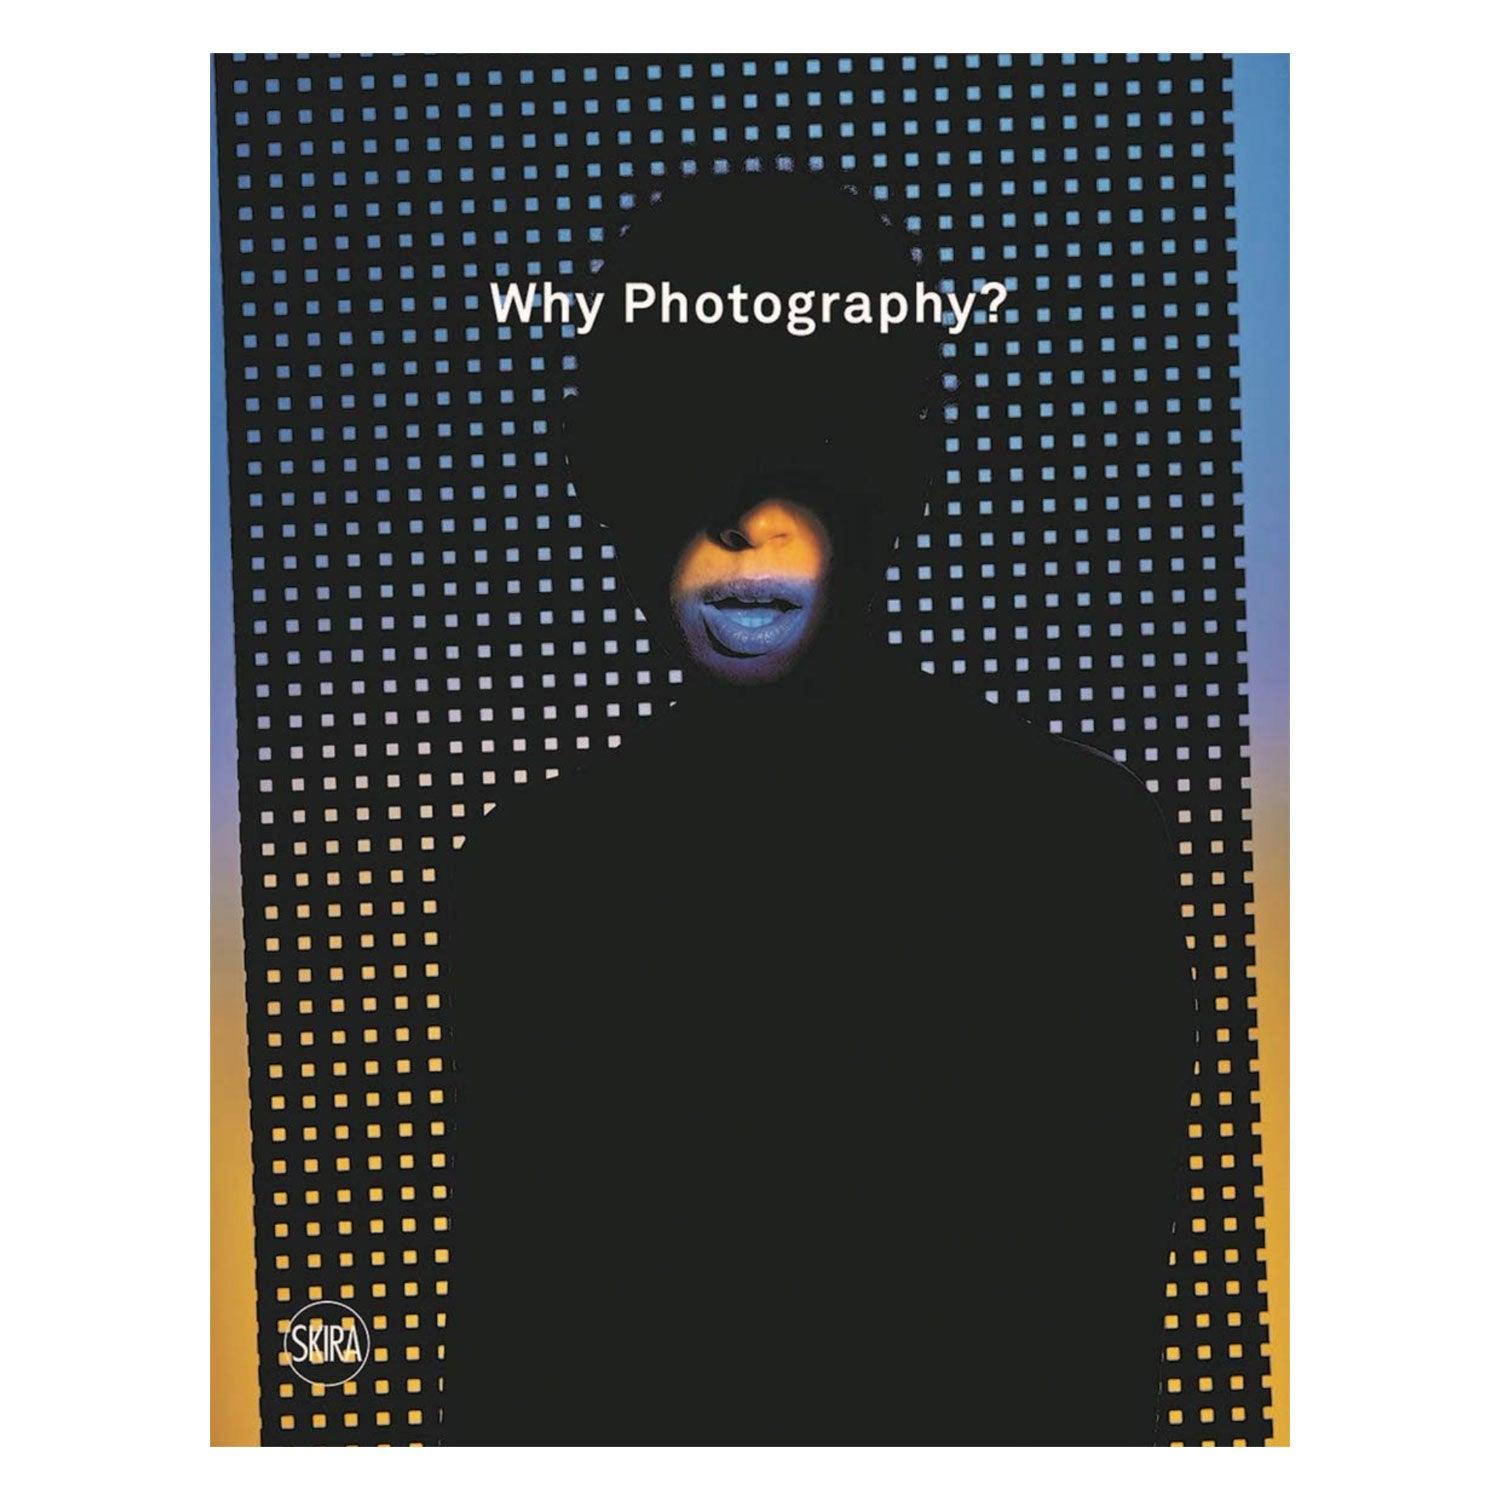 Why Photography?: New Visions: The Henie Onstad Triennial for Photography and New Media. Photo Museum Ireland